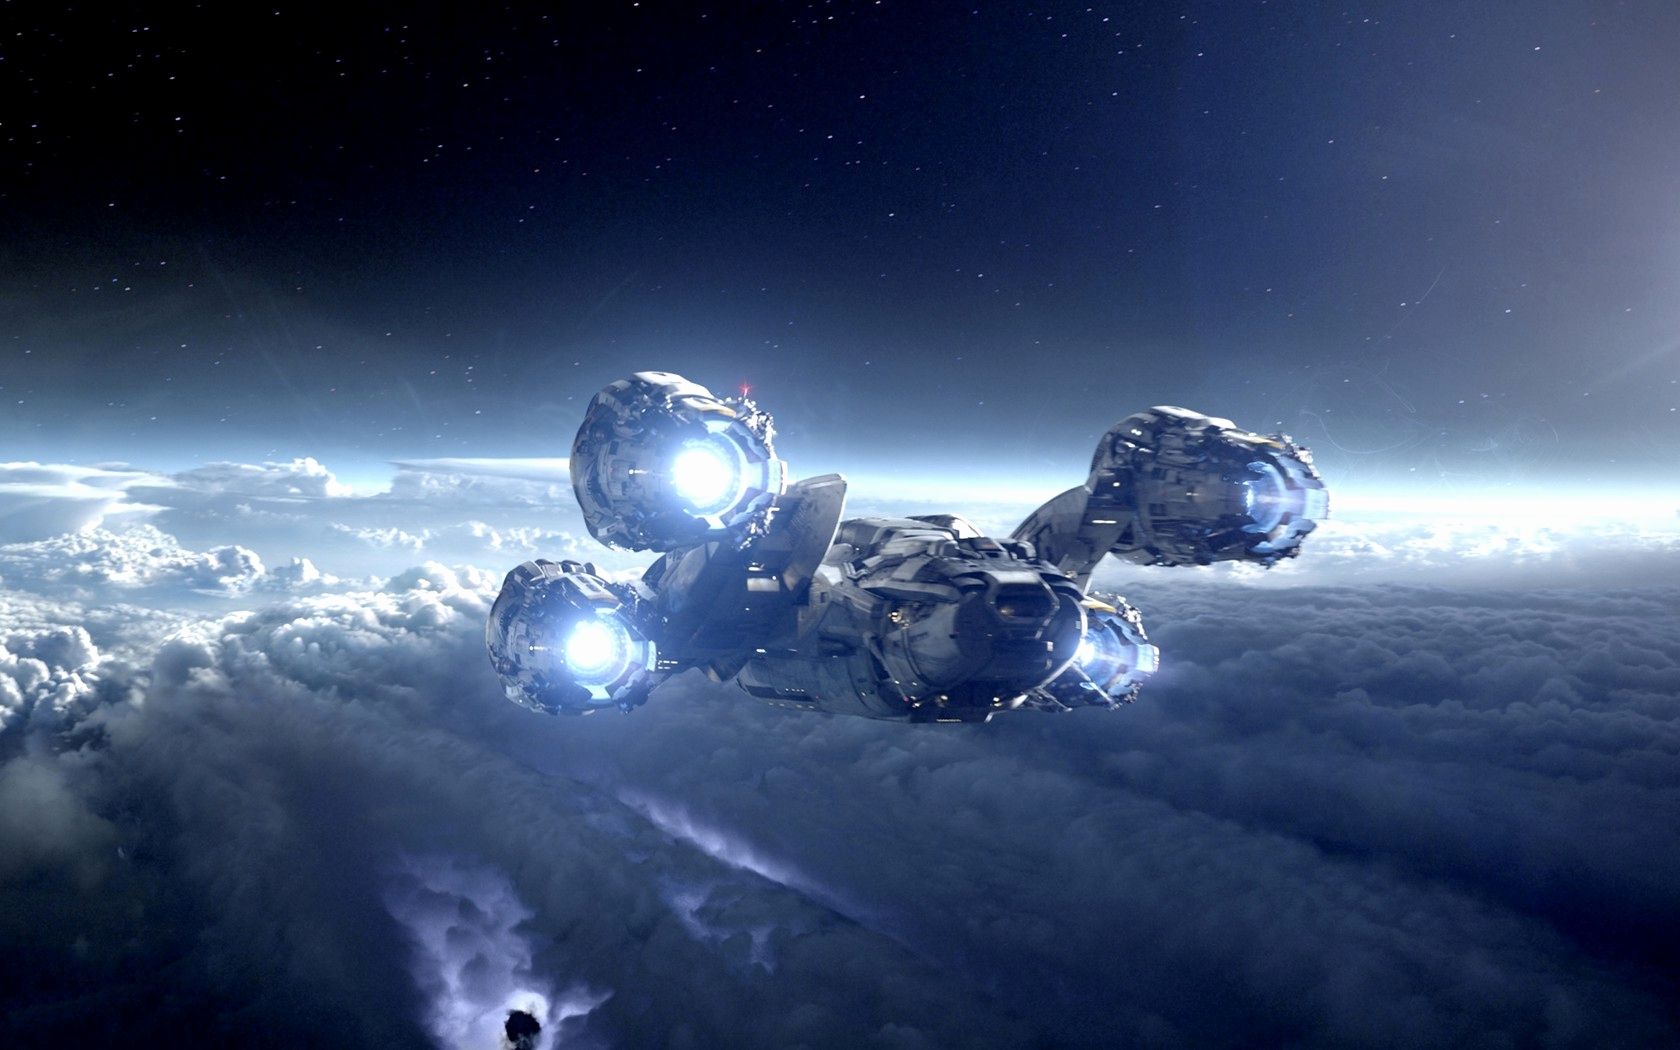 Spaceships Wallpaper New Halo Spaceship Halo 4 Unsc Infinity